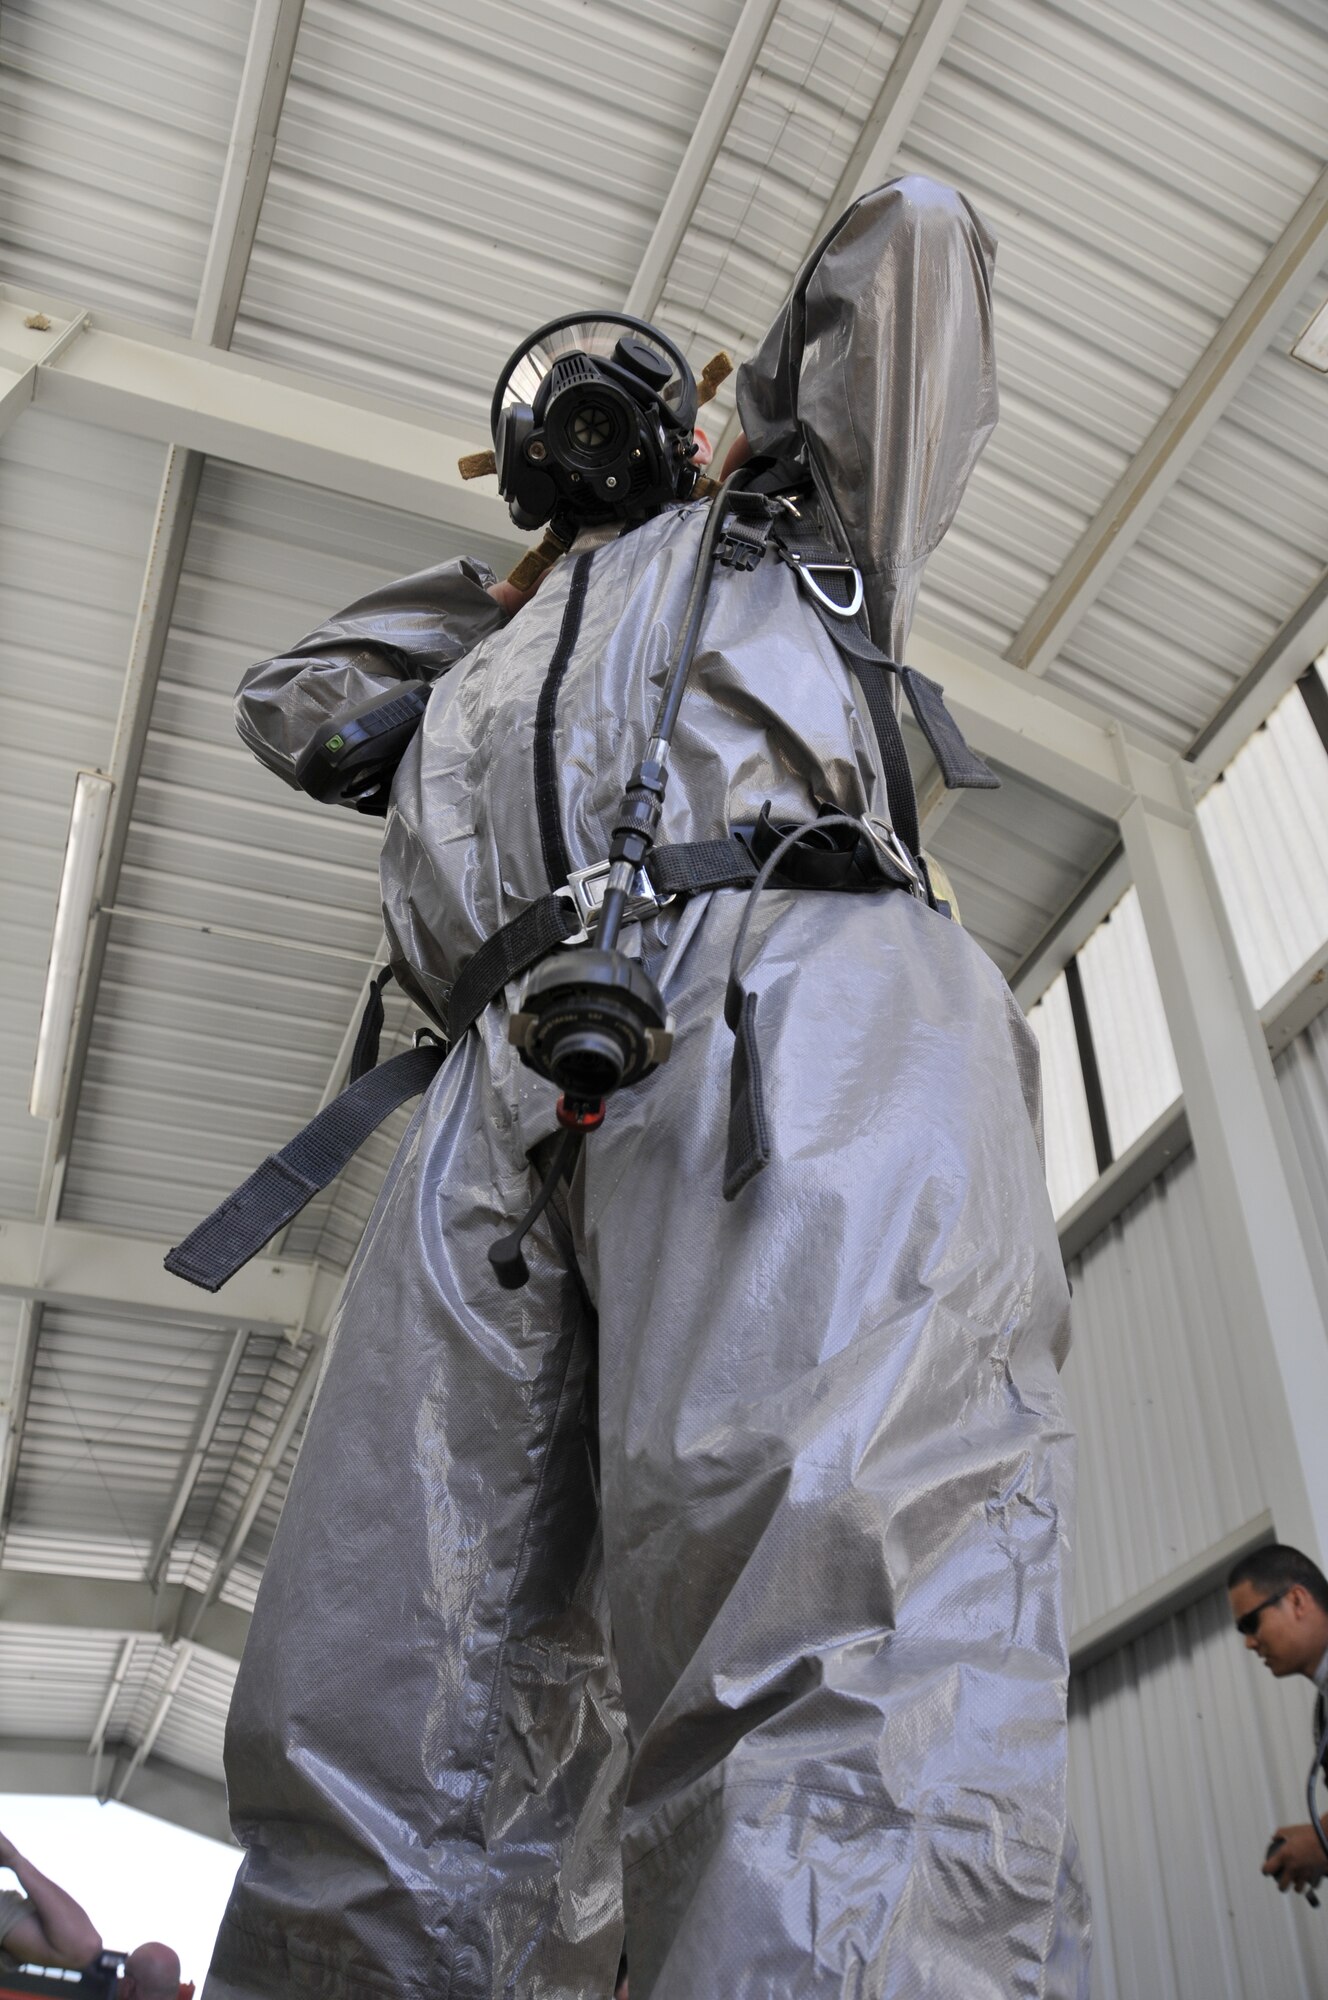 Emergency management specialists with the 188th Civil Engineering Squadron work to identify and clean up hazardous material spills during a training  exercise at Ebbing Air National Guard Base, Fort Smith, Ark., Oct. 4. (U.S. Air National Guard photo by Staff Sgt. John Suleski/released)